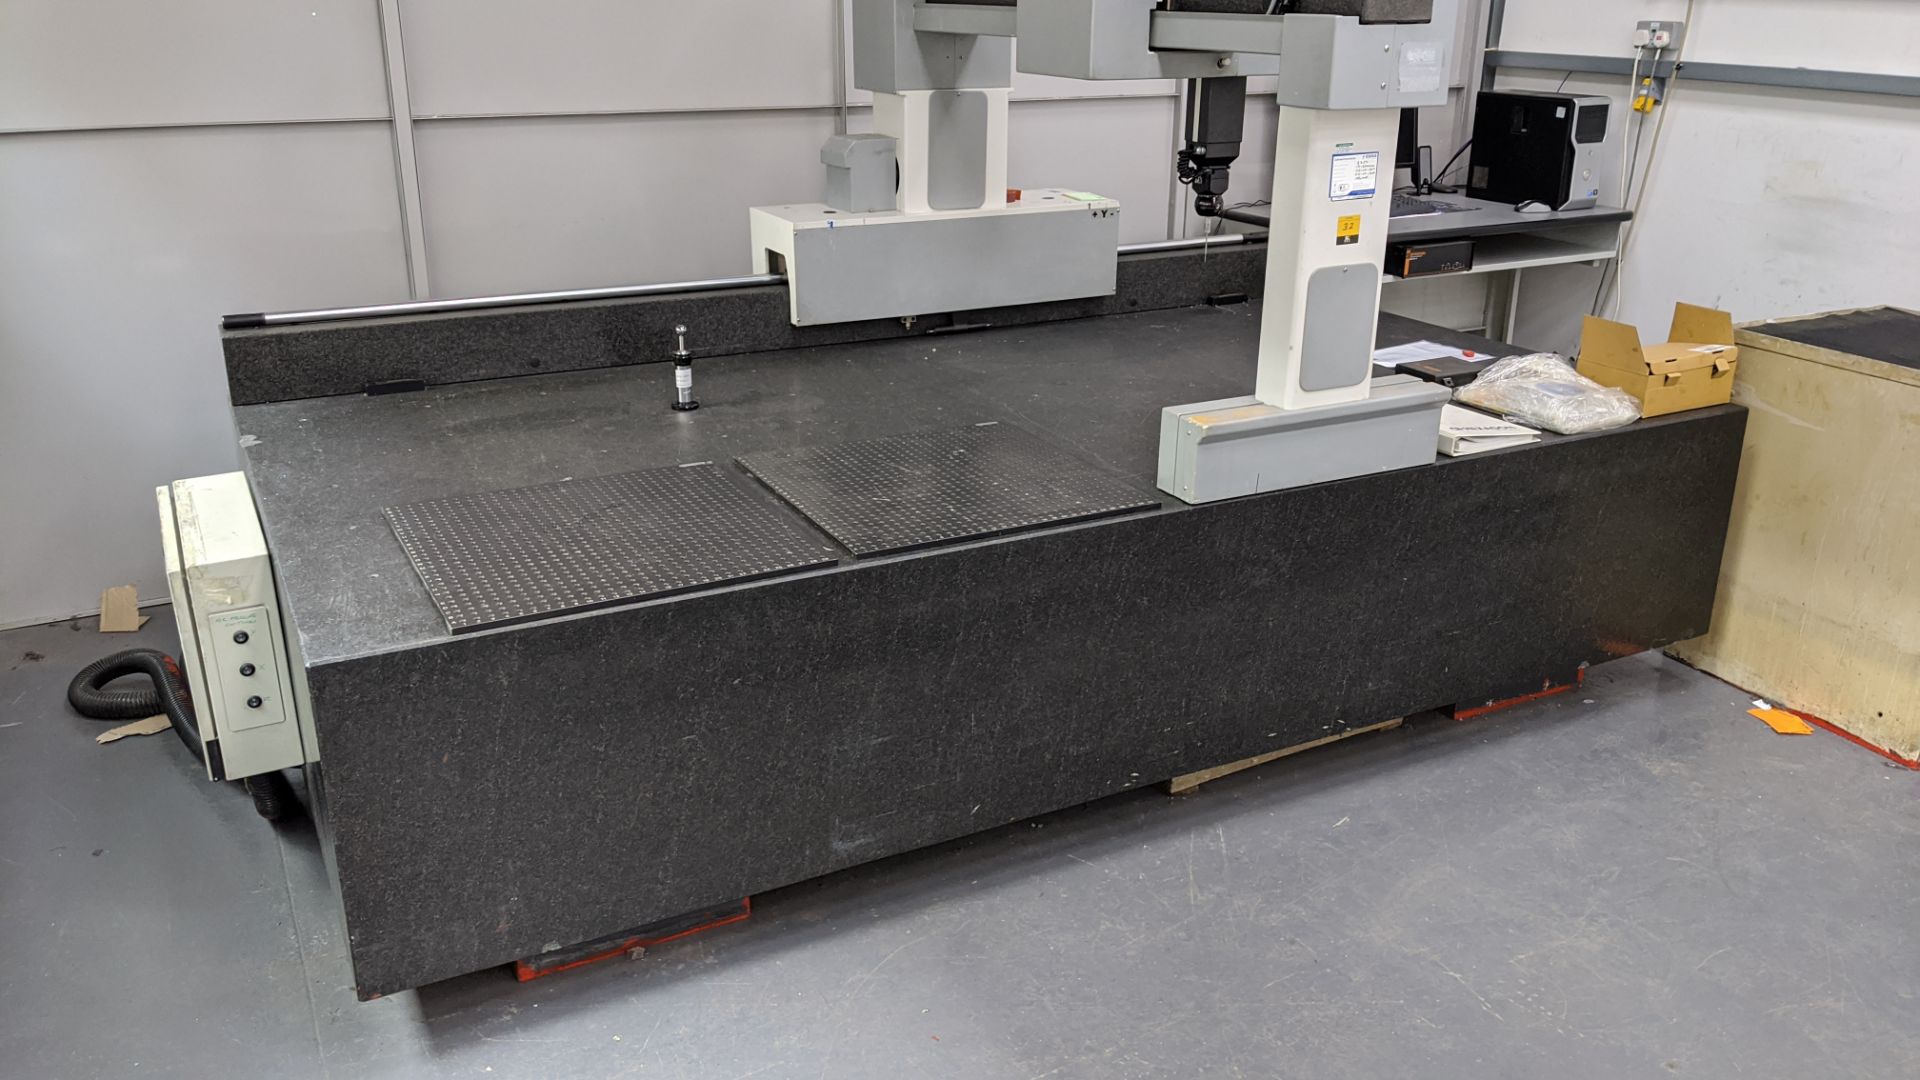 LK Microvector CMM model G80 with Renishaw model PH10T probe on granite table measuring approx. - Image 17 of 28